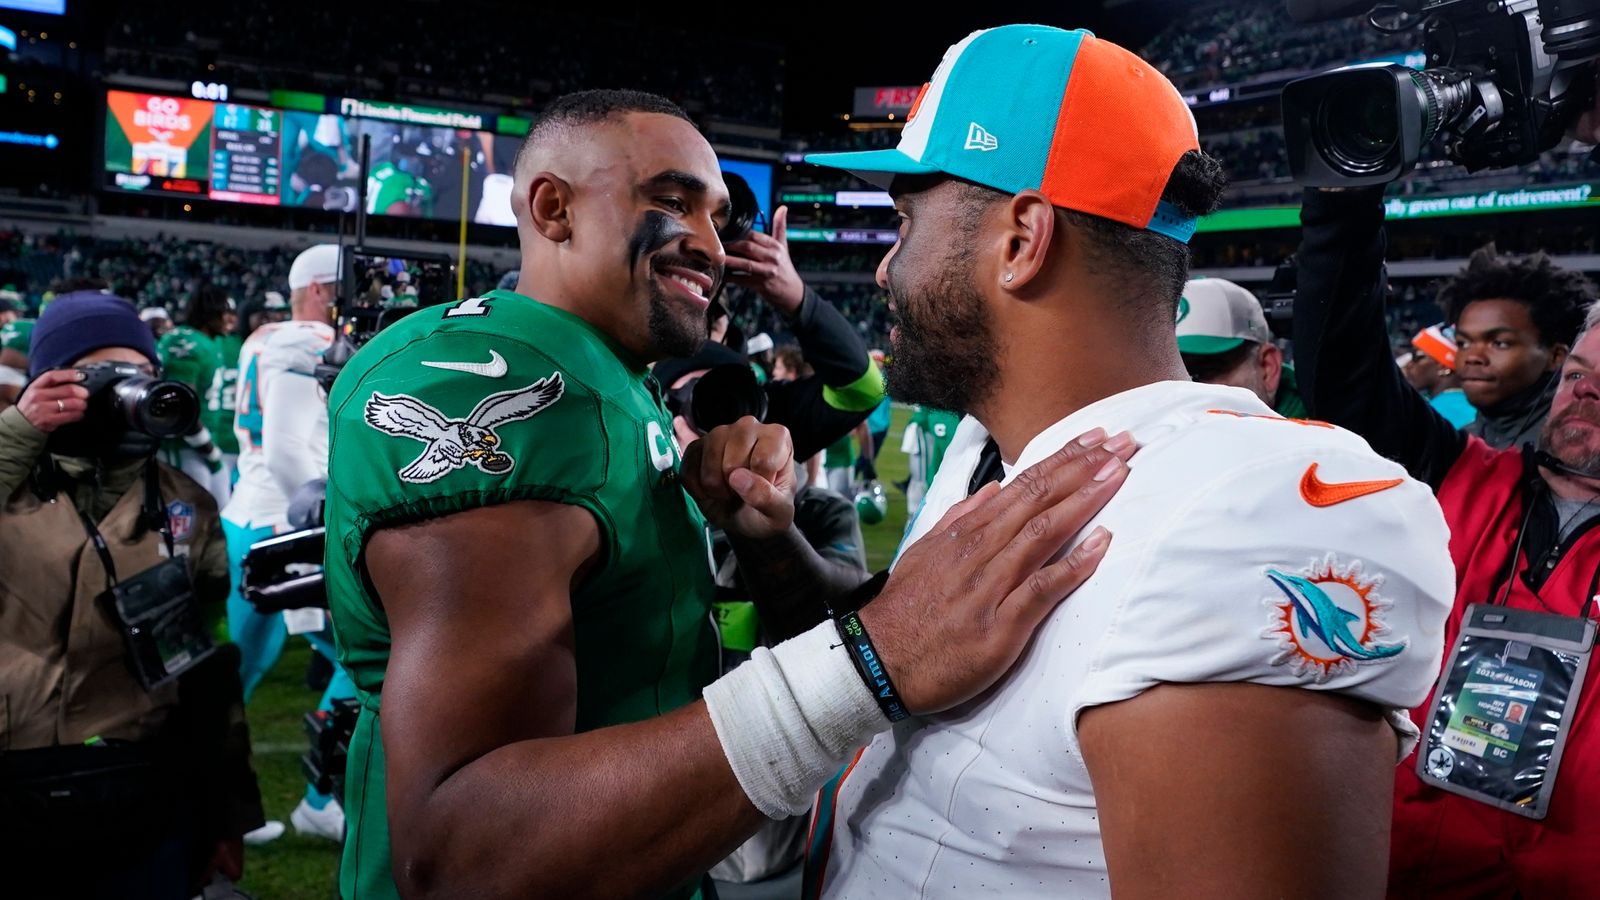 Jalen Hurts shrugs off pick-six to lead Philadelphia Eagles to win over Miami Dolphins in Sunday night NFL game